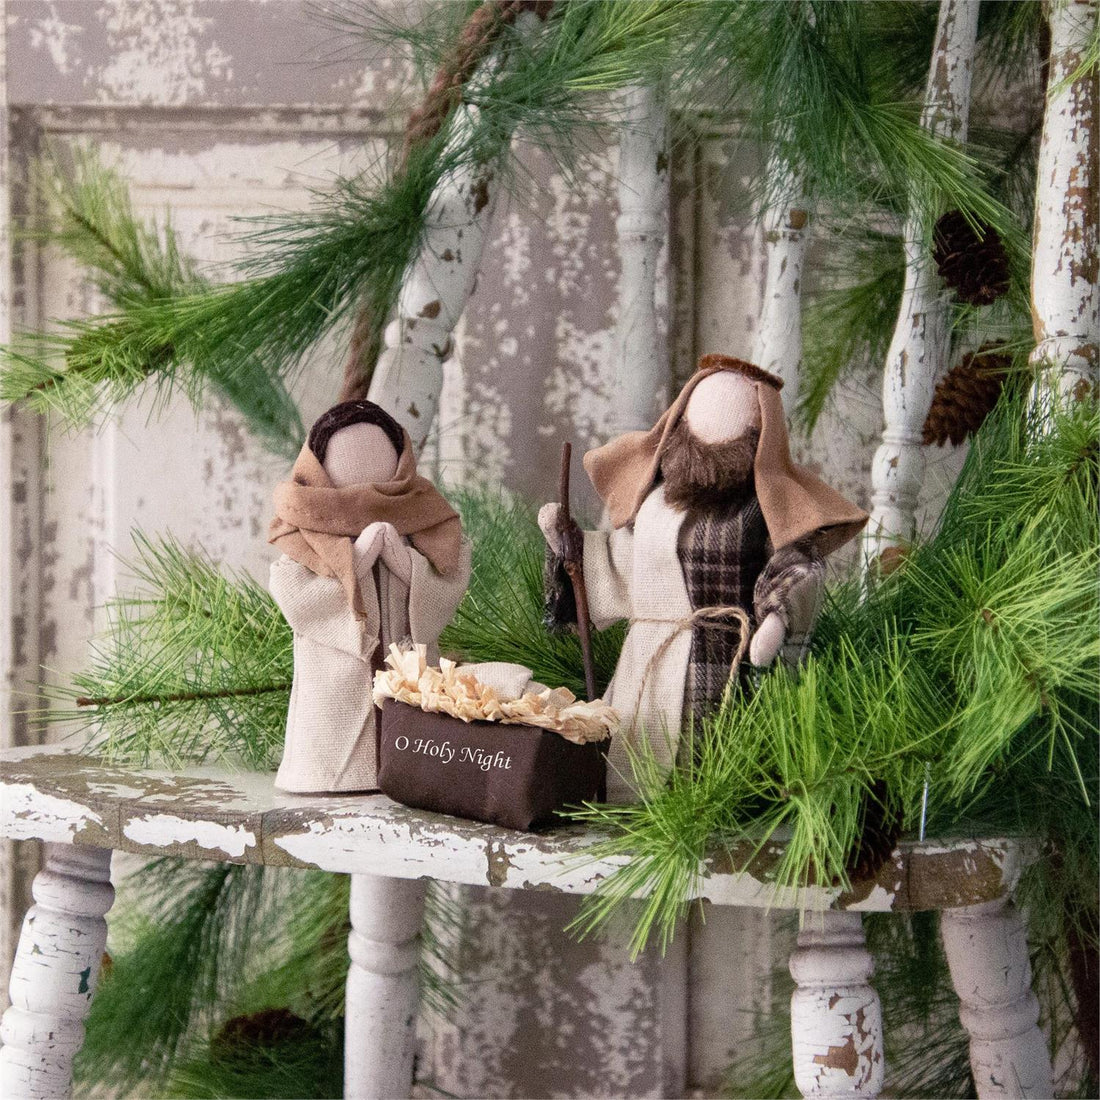 Christmas Primitive Oh Holy Night Nativity Figures 3 pc - The Primitive Pineapple Collection